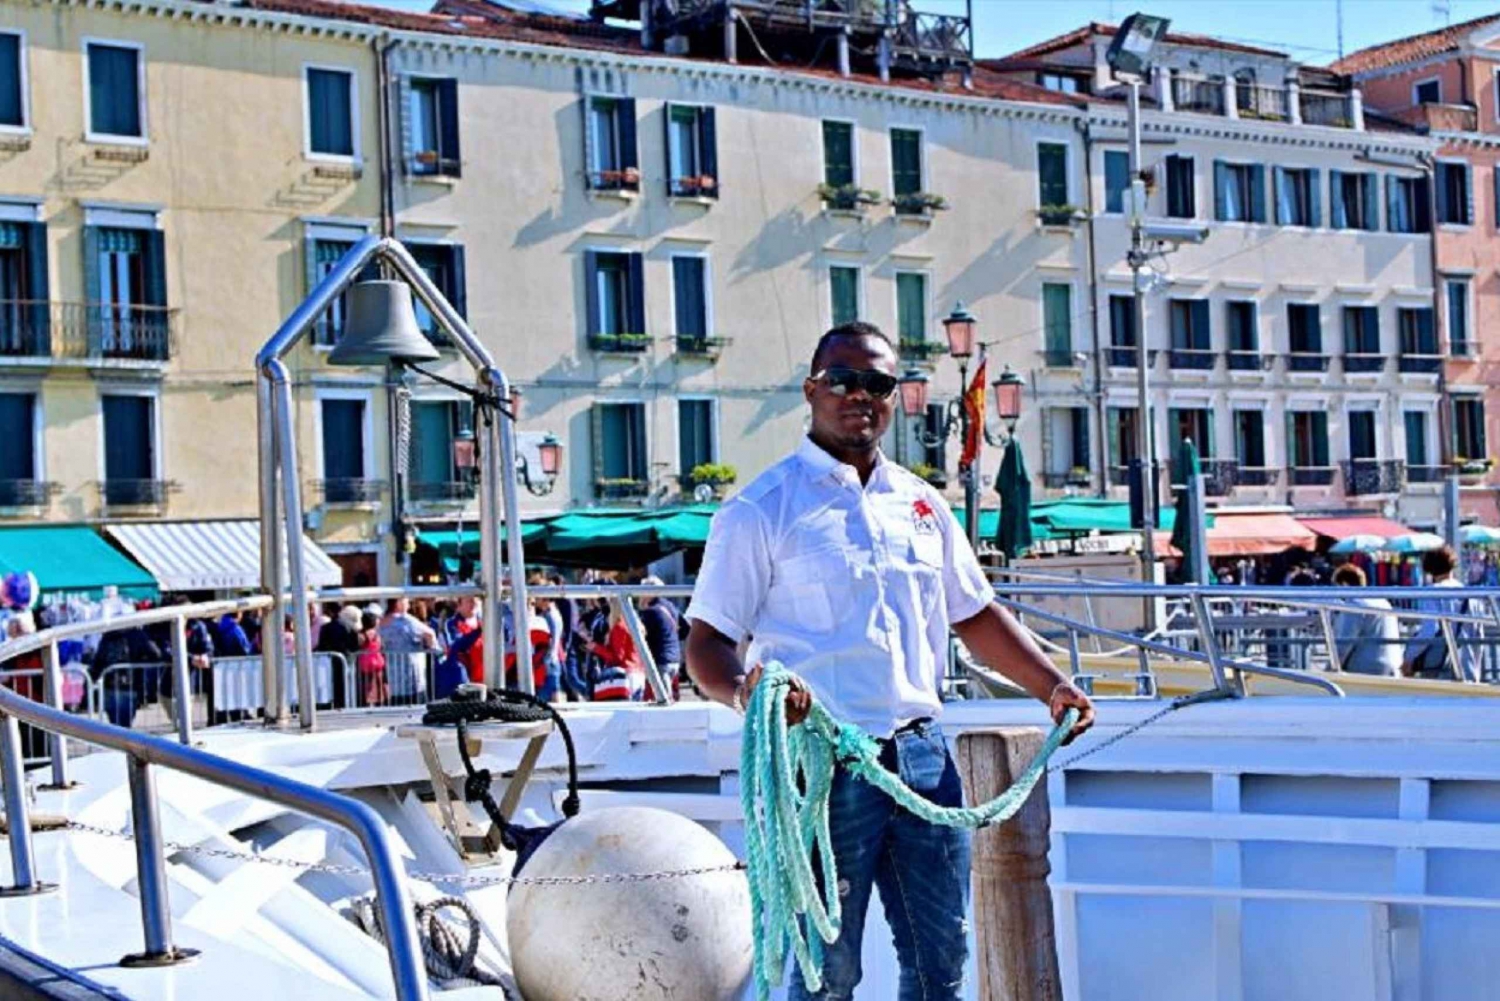 From Punta Sabbioni: Round-Trip Boat Transfer to Venice